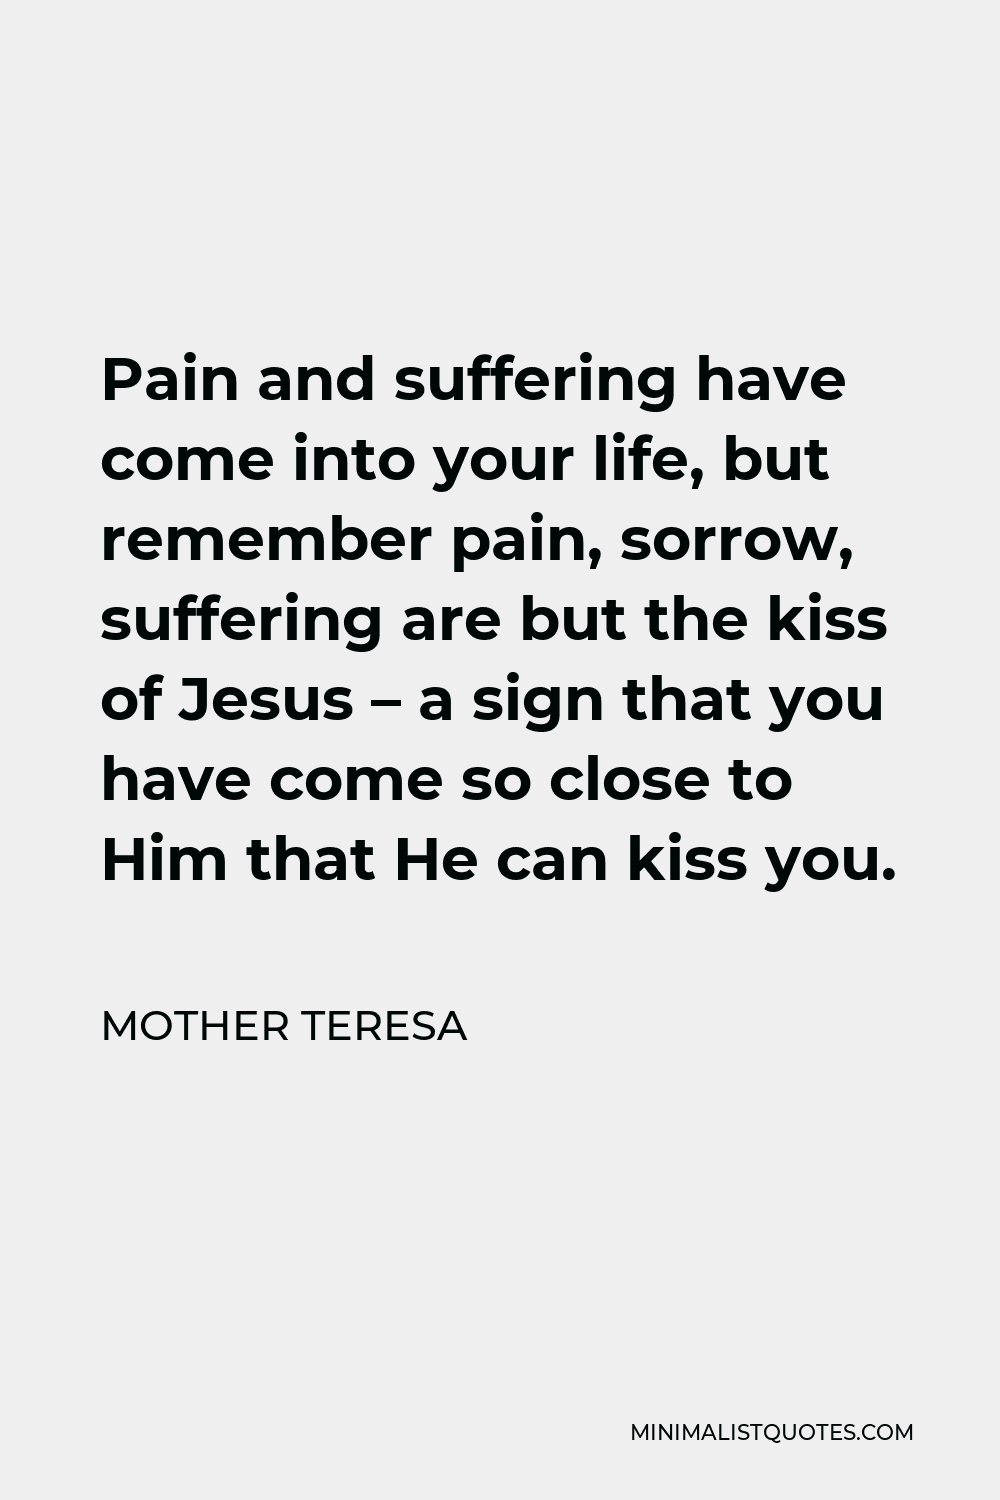 Mother Teresa Quote - Pain and suffering have come into your life, but remember pain, sorrow, suffering are but the kiss of Jesus – a sign that you have come so close to Him that He can kiss you.